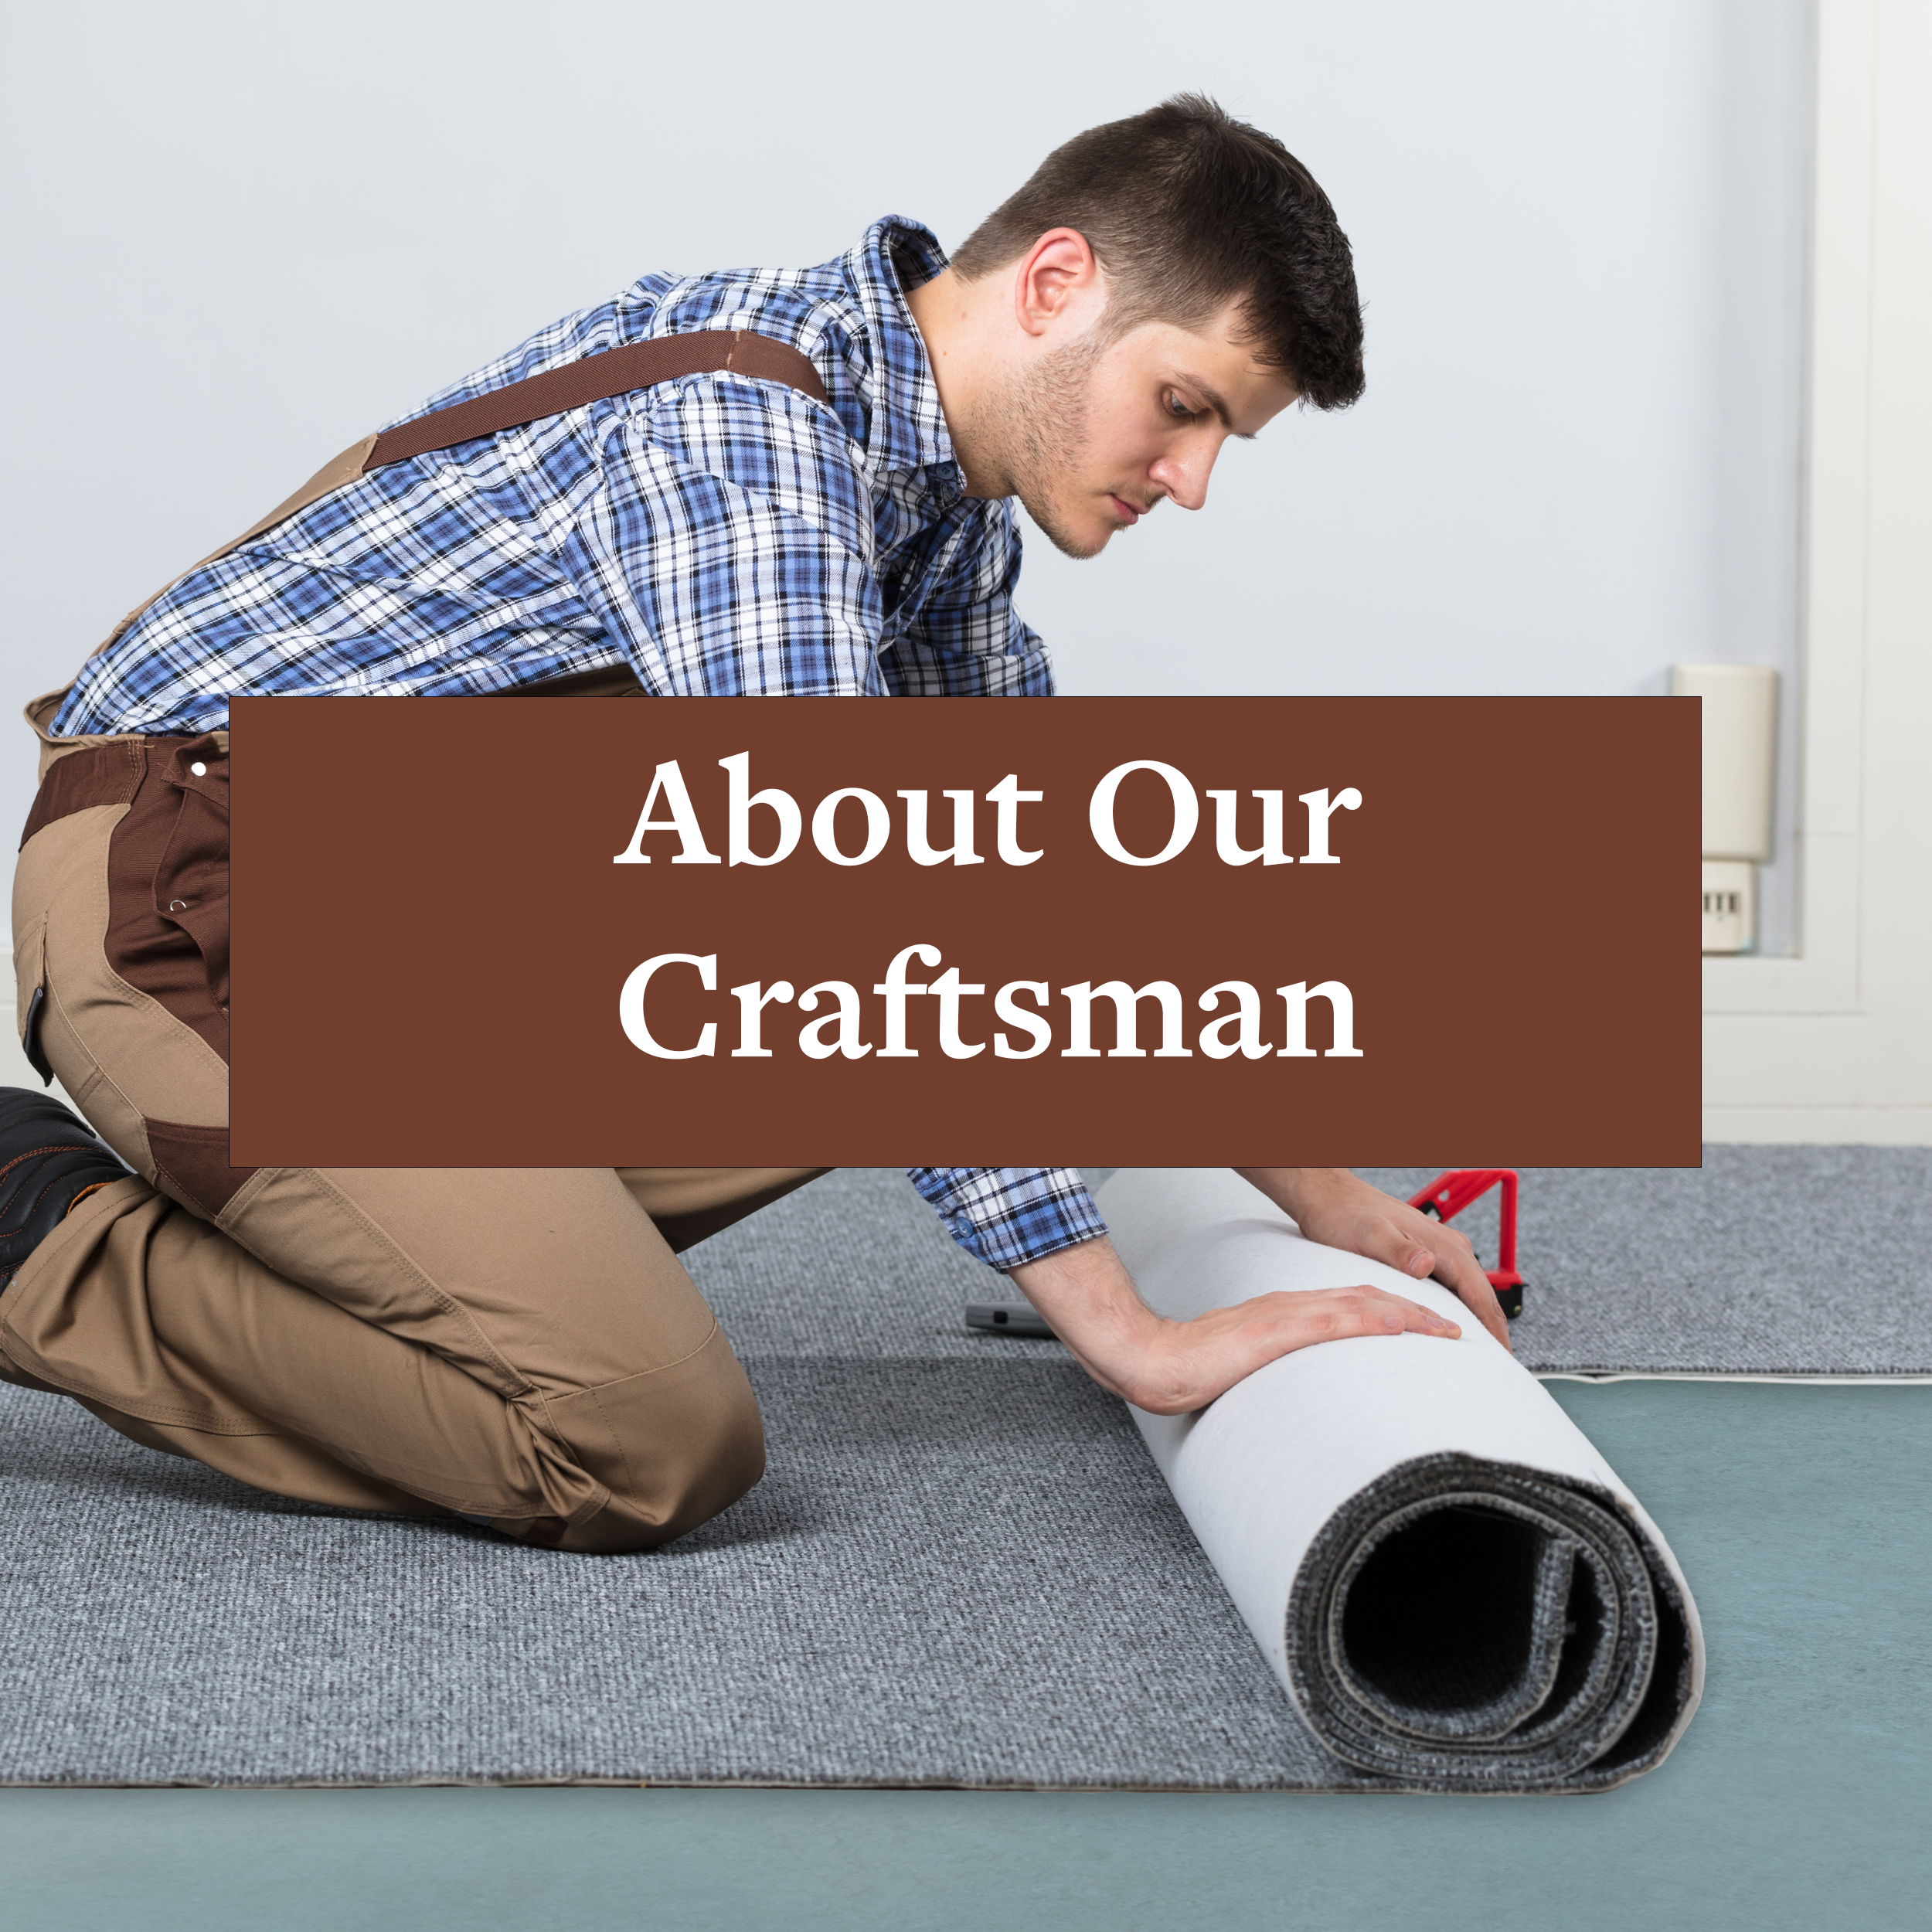 About Our Craftsmen